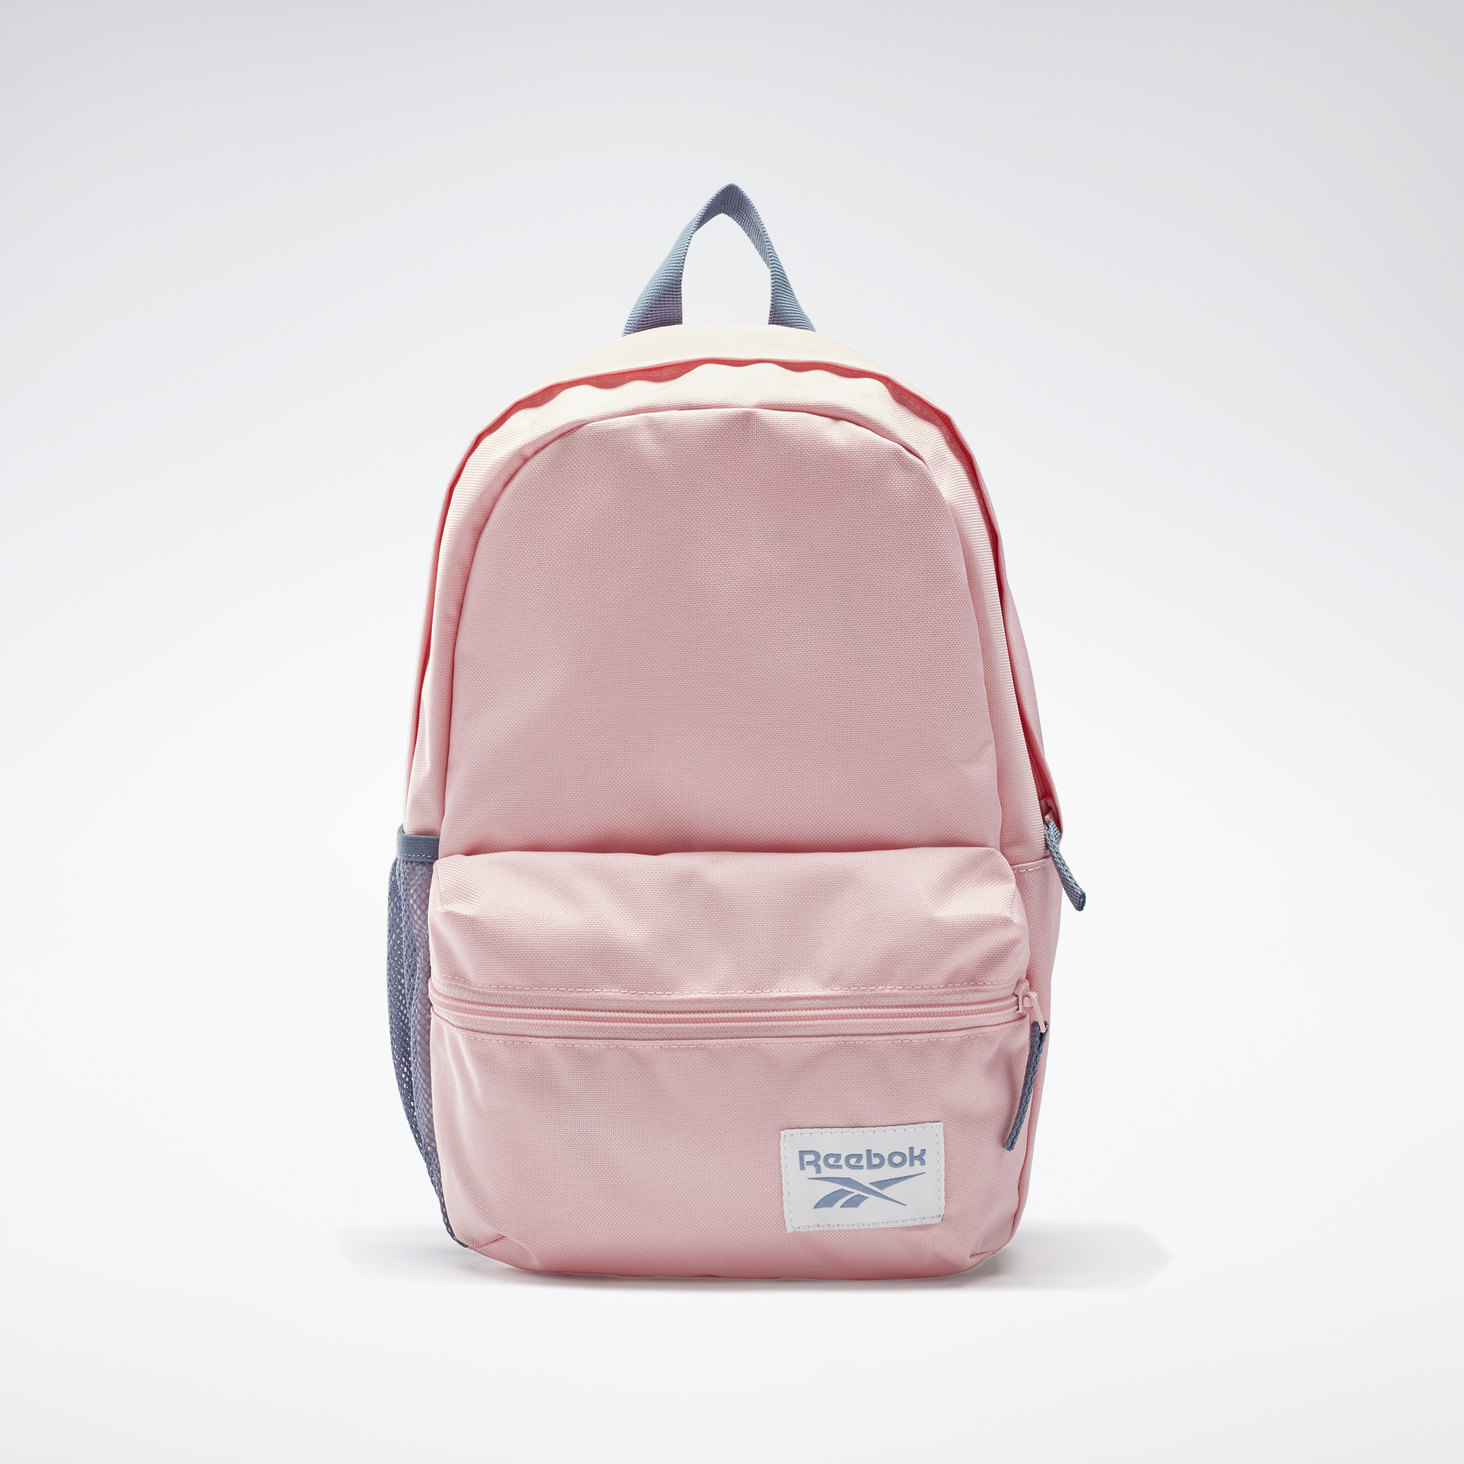 Pencil Case Backpack